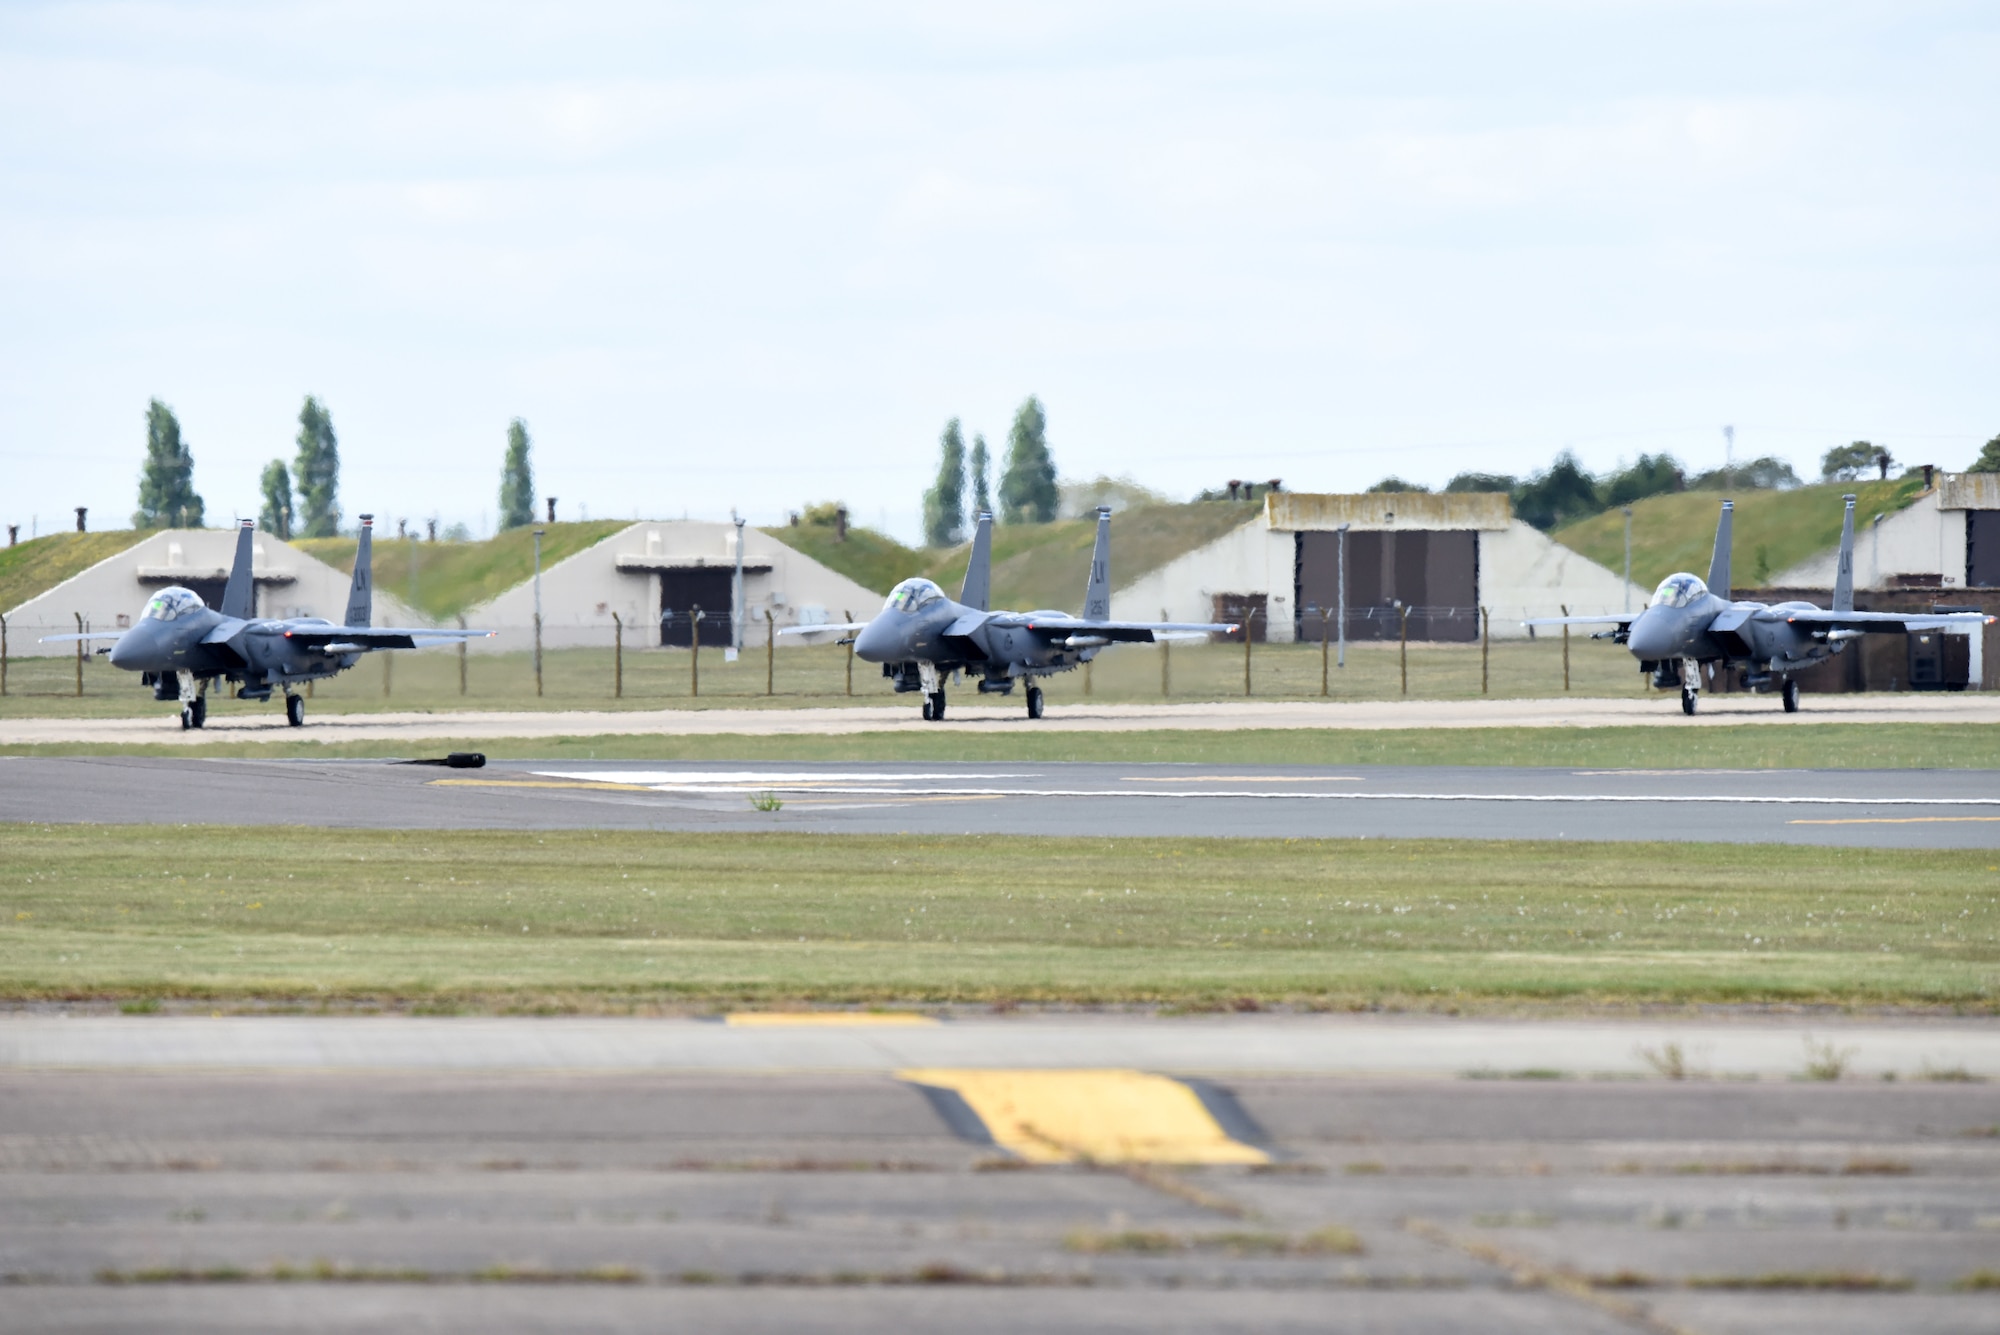 An F-15E Strike Eagle assigned to the 494th Fighter Squadron takes off at Royal Air Force Lakenheath, England, May 14, 2020.  Despite the current COVID-19 crisis, the 48th Fighter Wing continues to maintain mission-readiness in order to safeguard U.S. national interests and those of our allies and partners. (U.S. Air Force photo by Airman 1st Class Rhonda Smith)